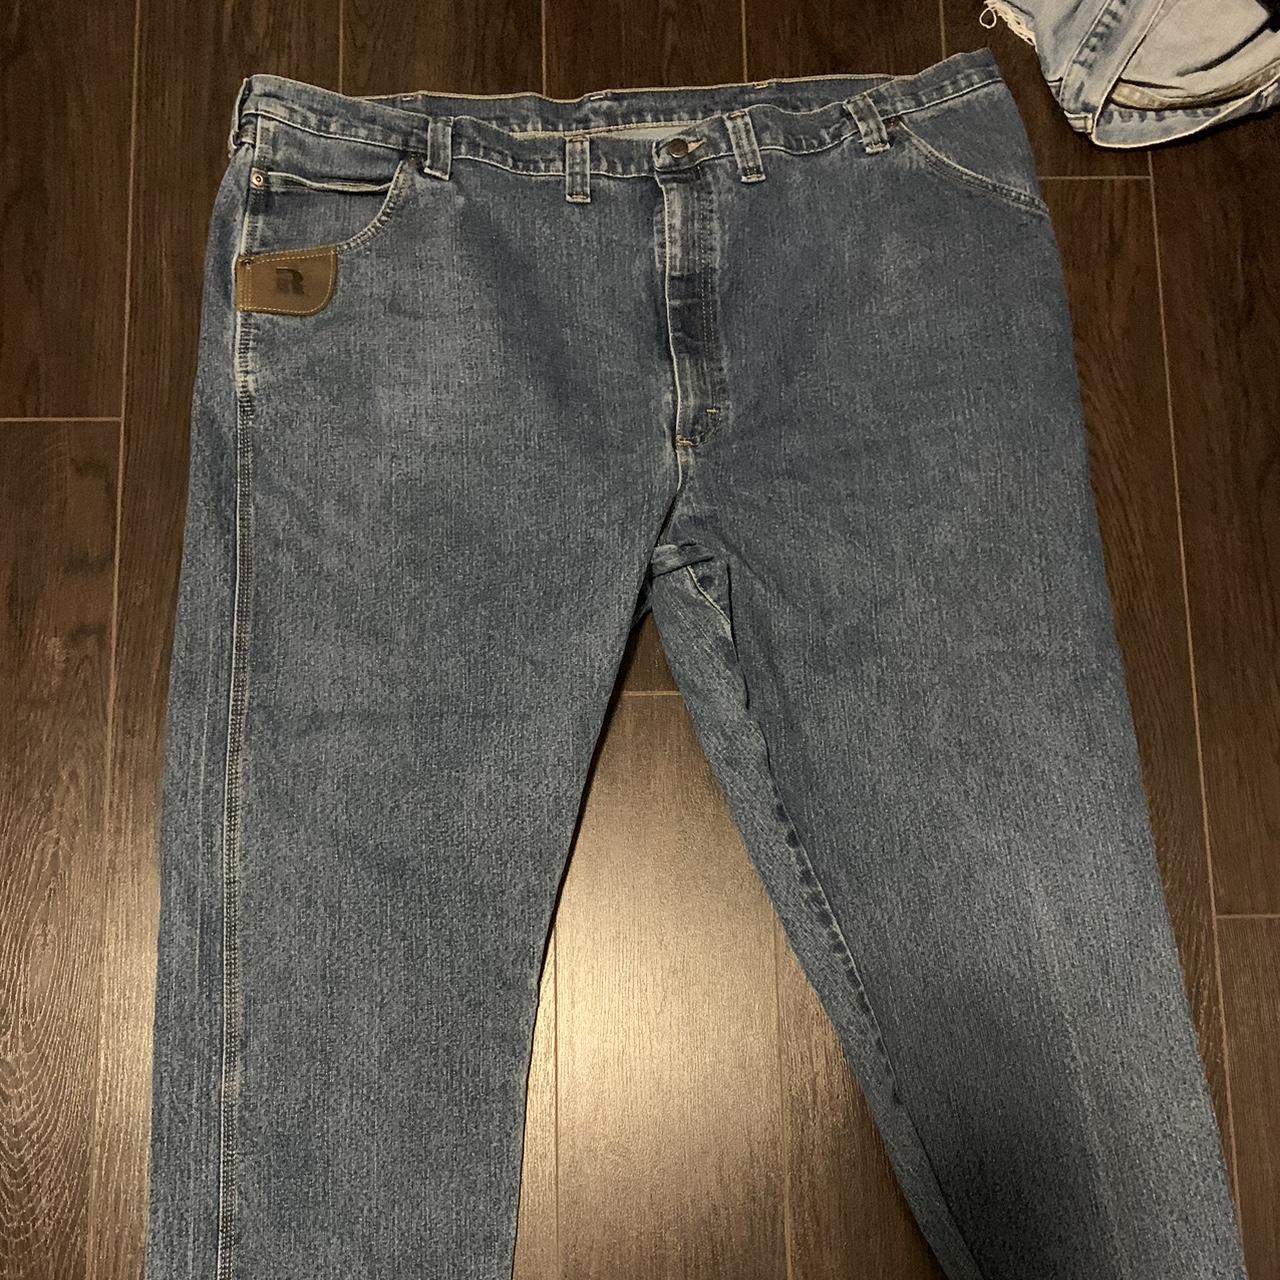 Baggy Wrangler Jeans / Size 50 Fits well with belt - Depop